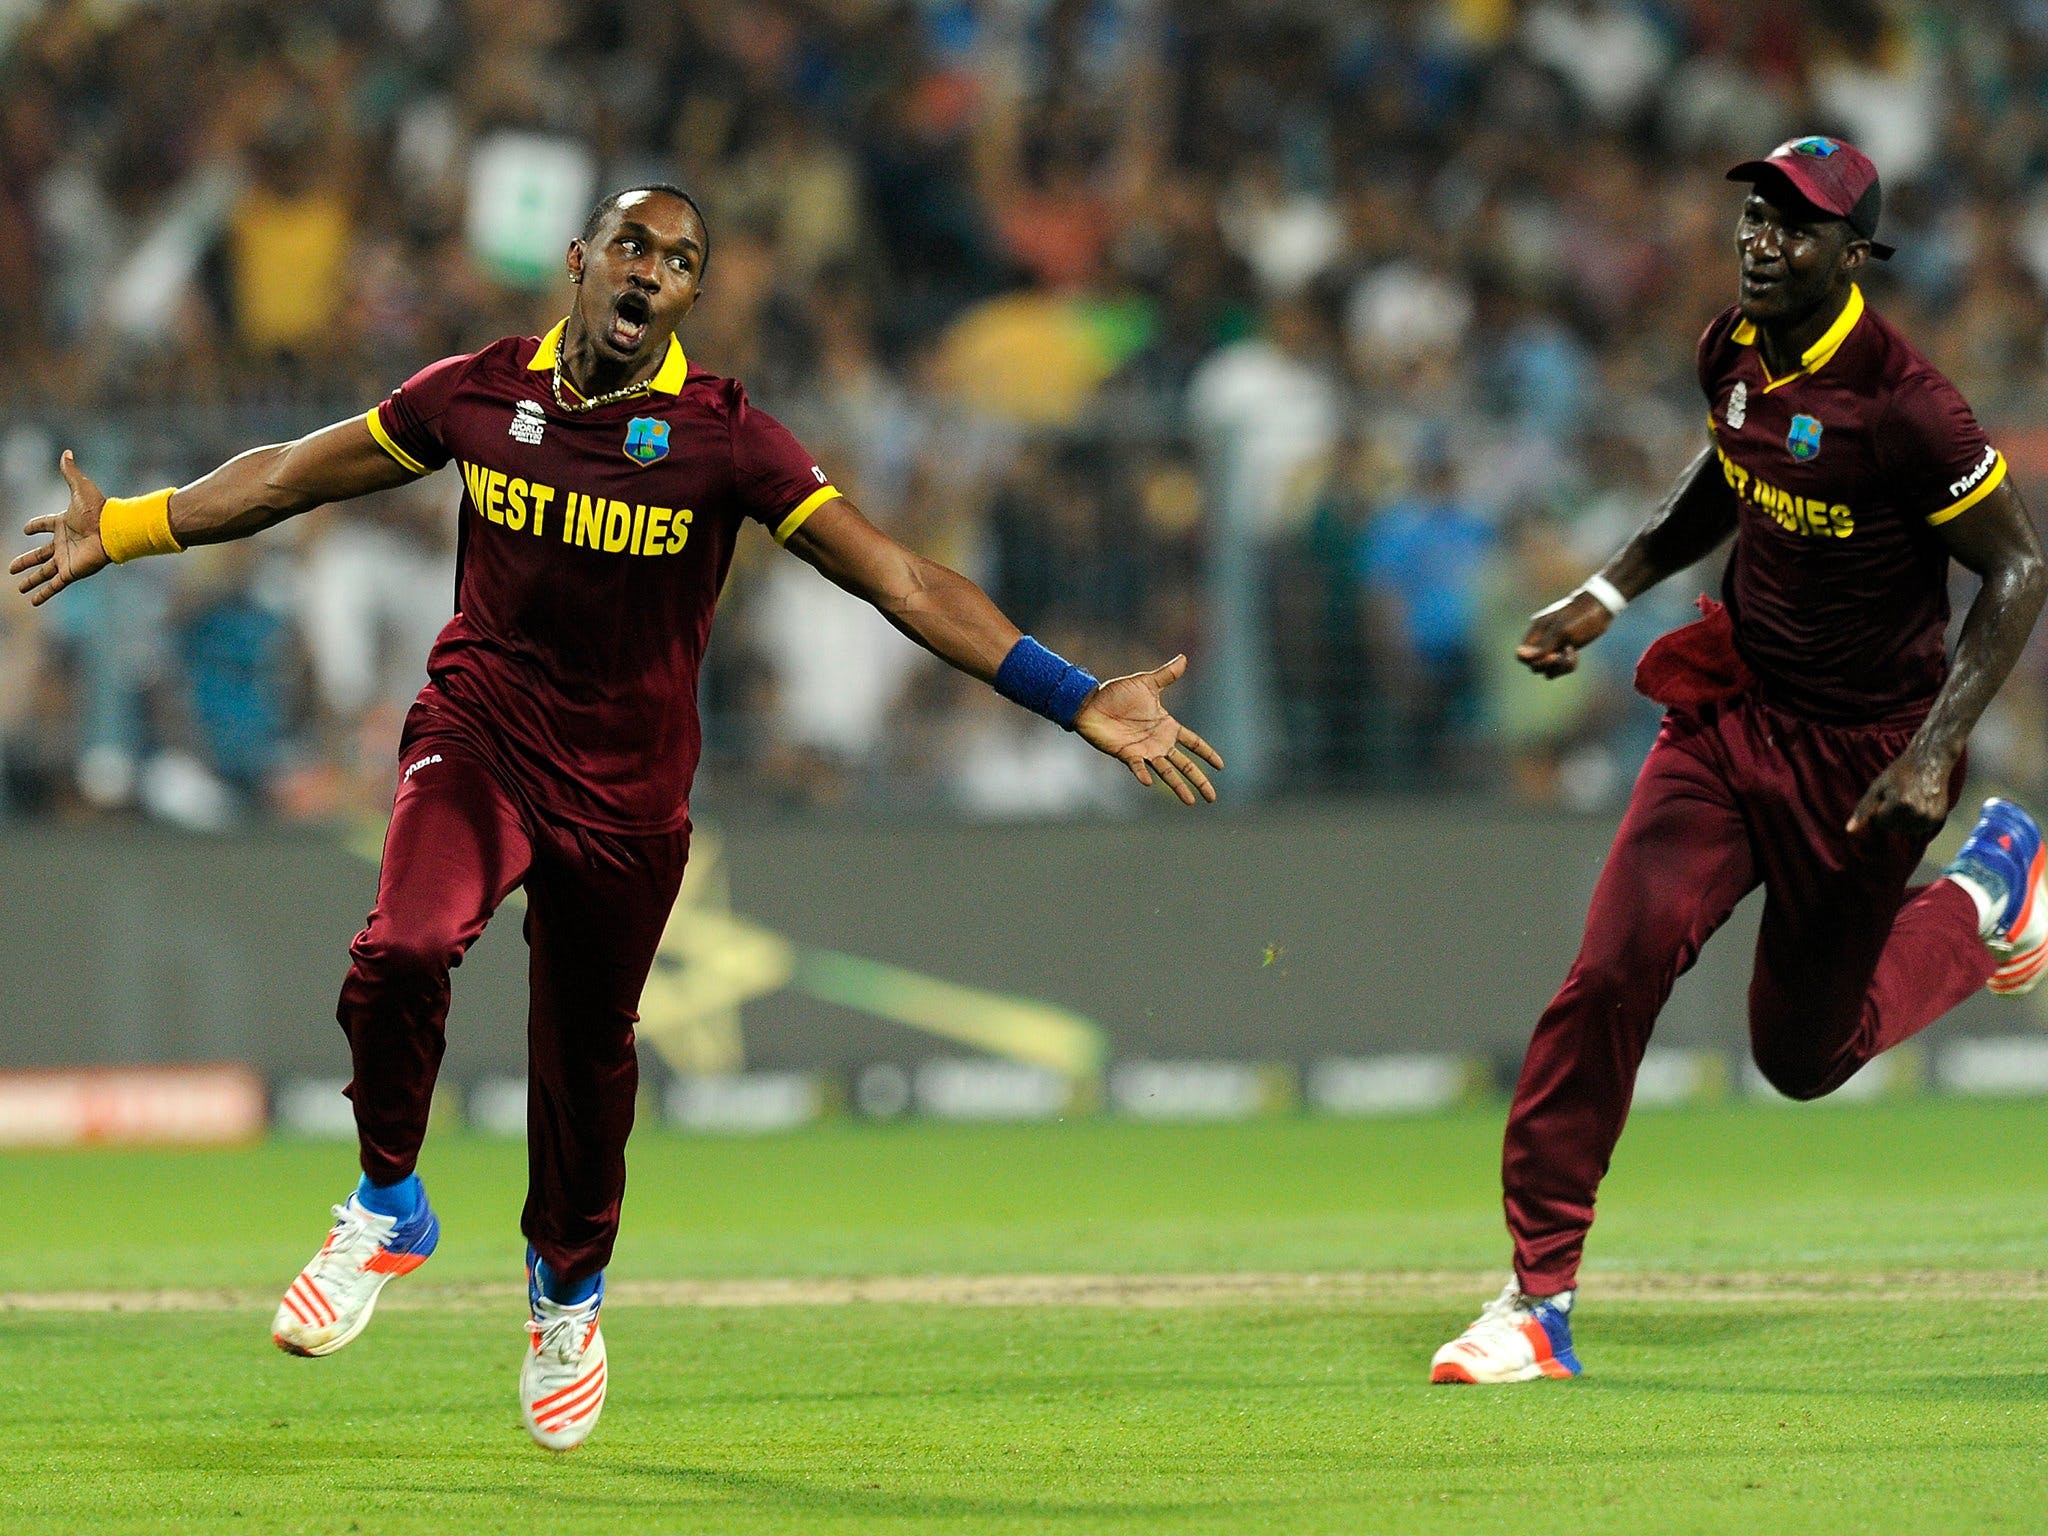 ICC Men's T20 World Cup - West Indies v Qualifier B2 - Accommodation Bookings